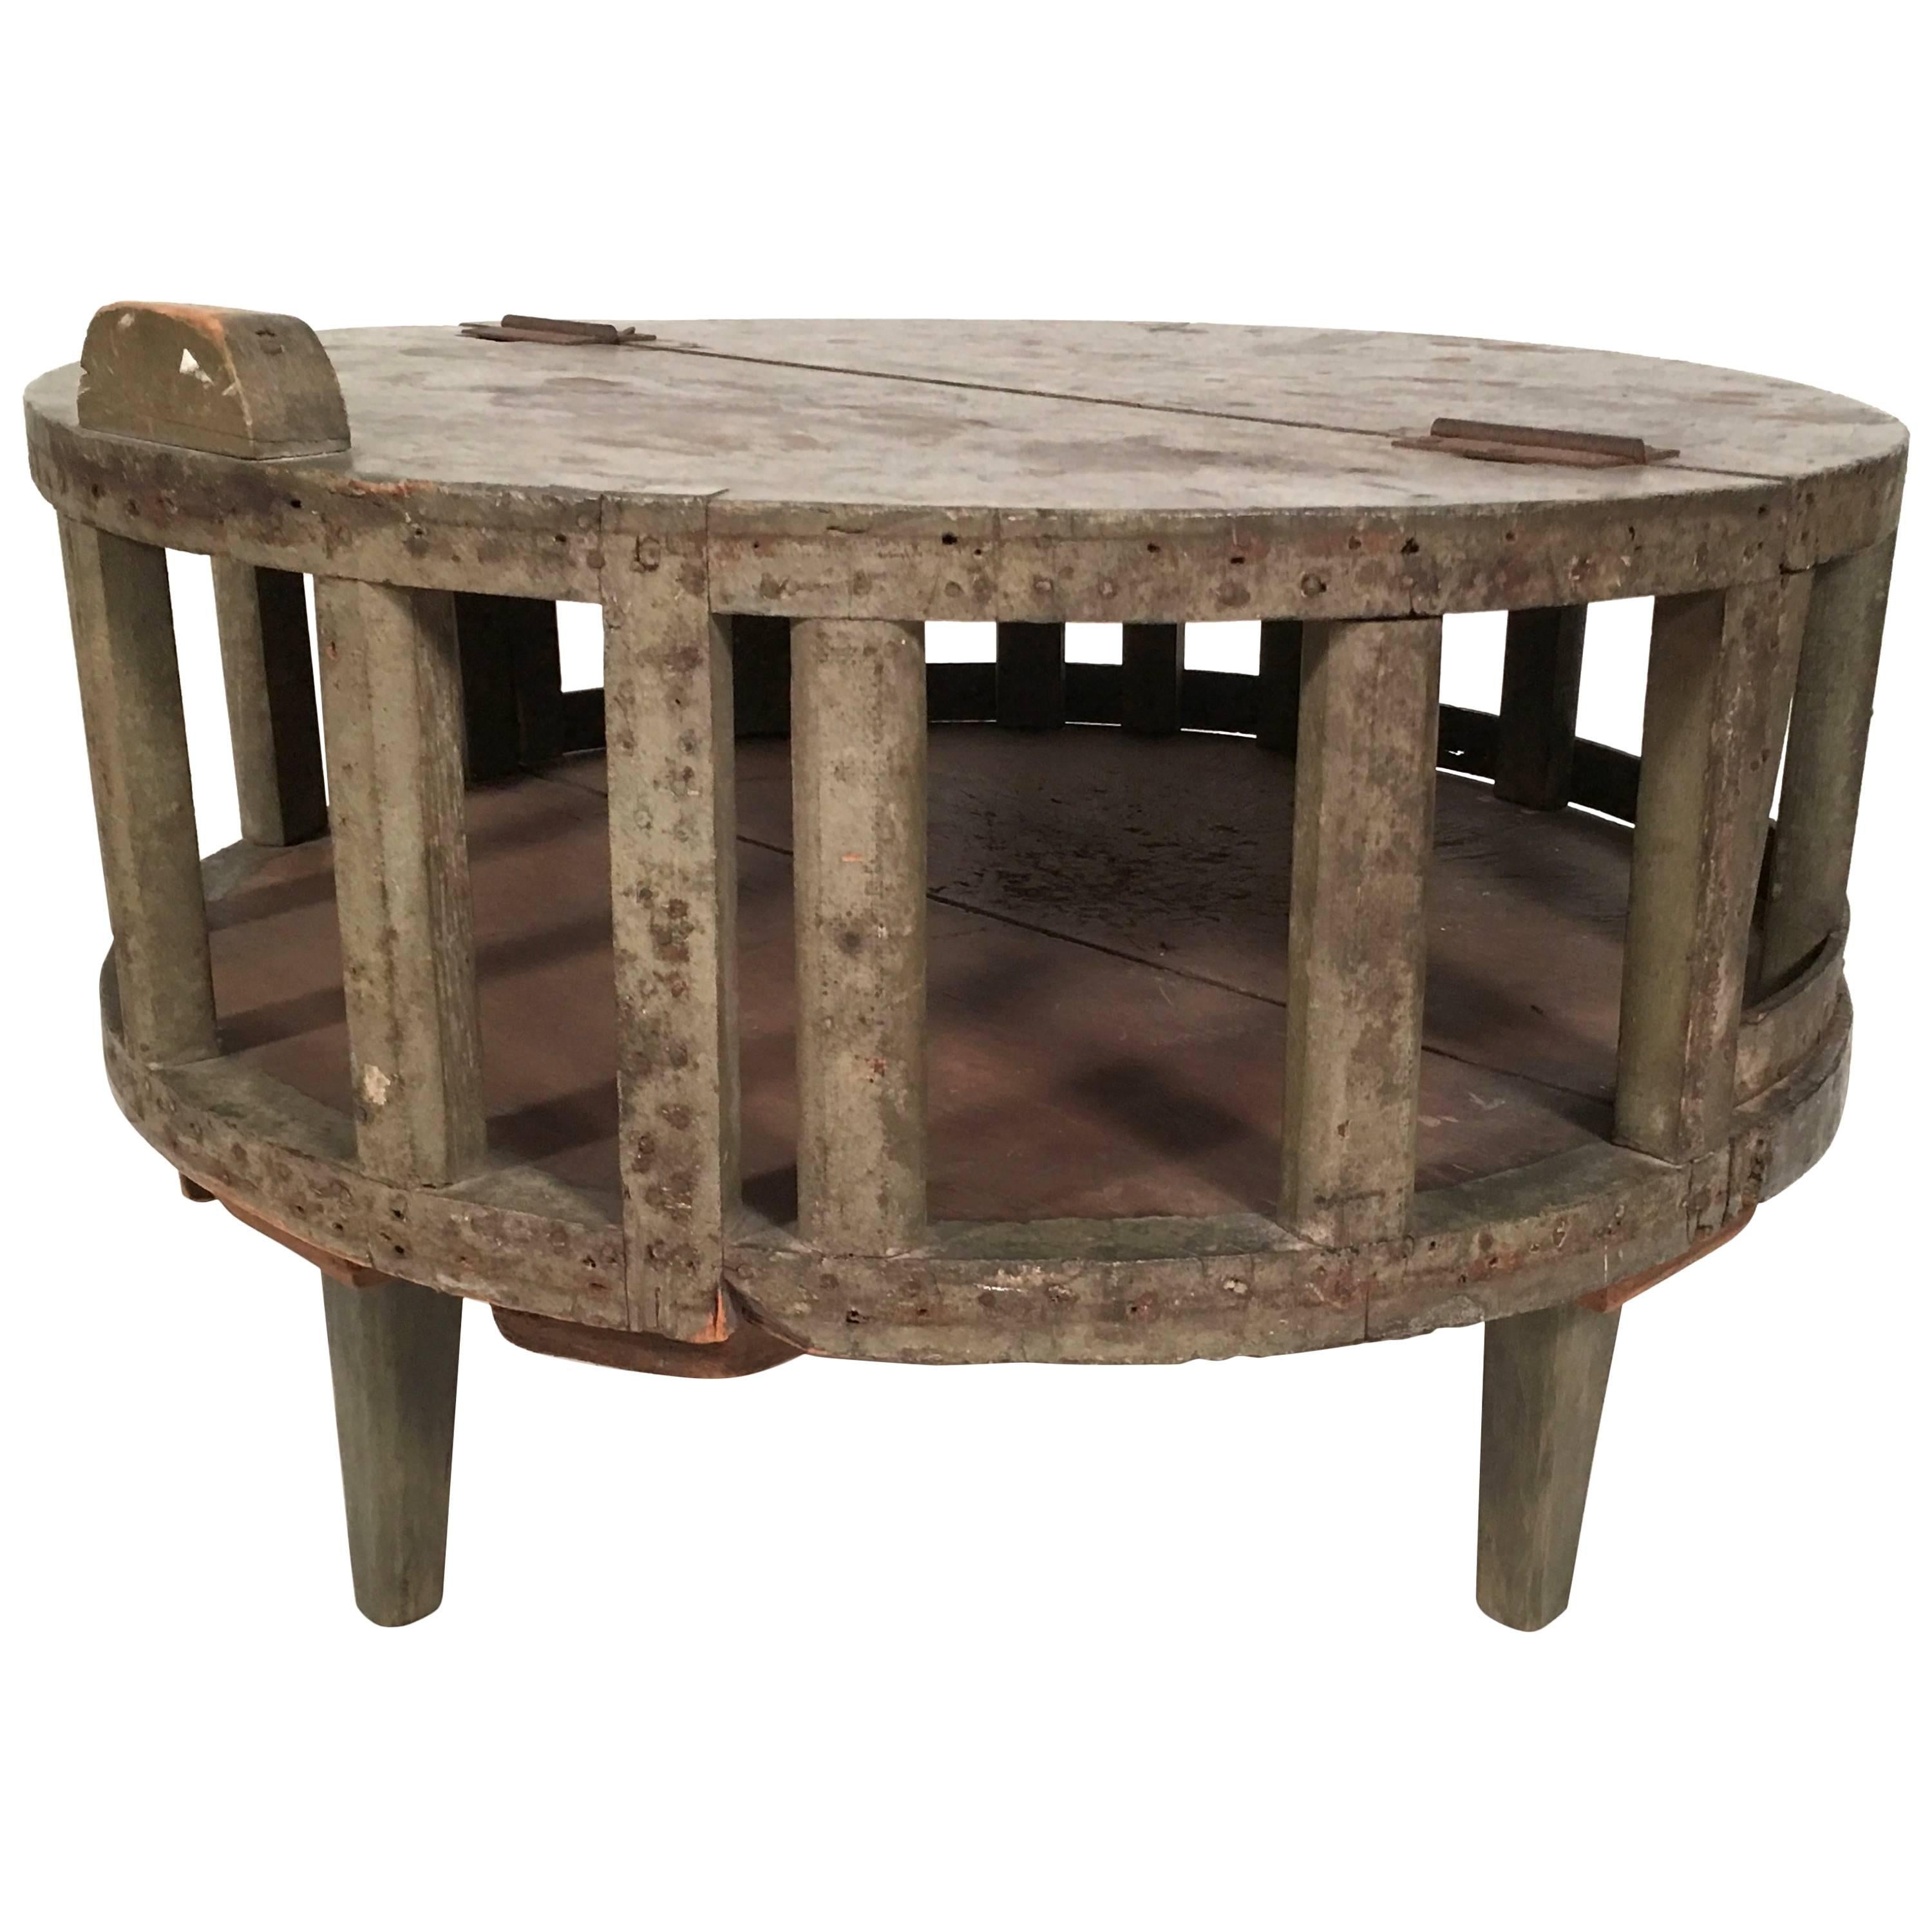 19th Century New England Country Store Cheese Display Table